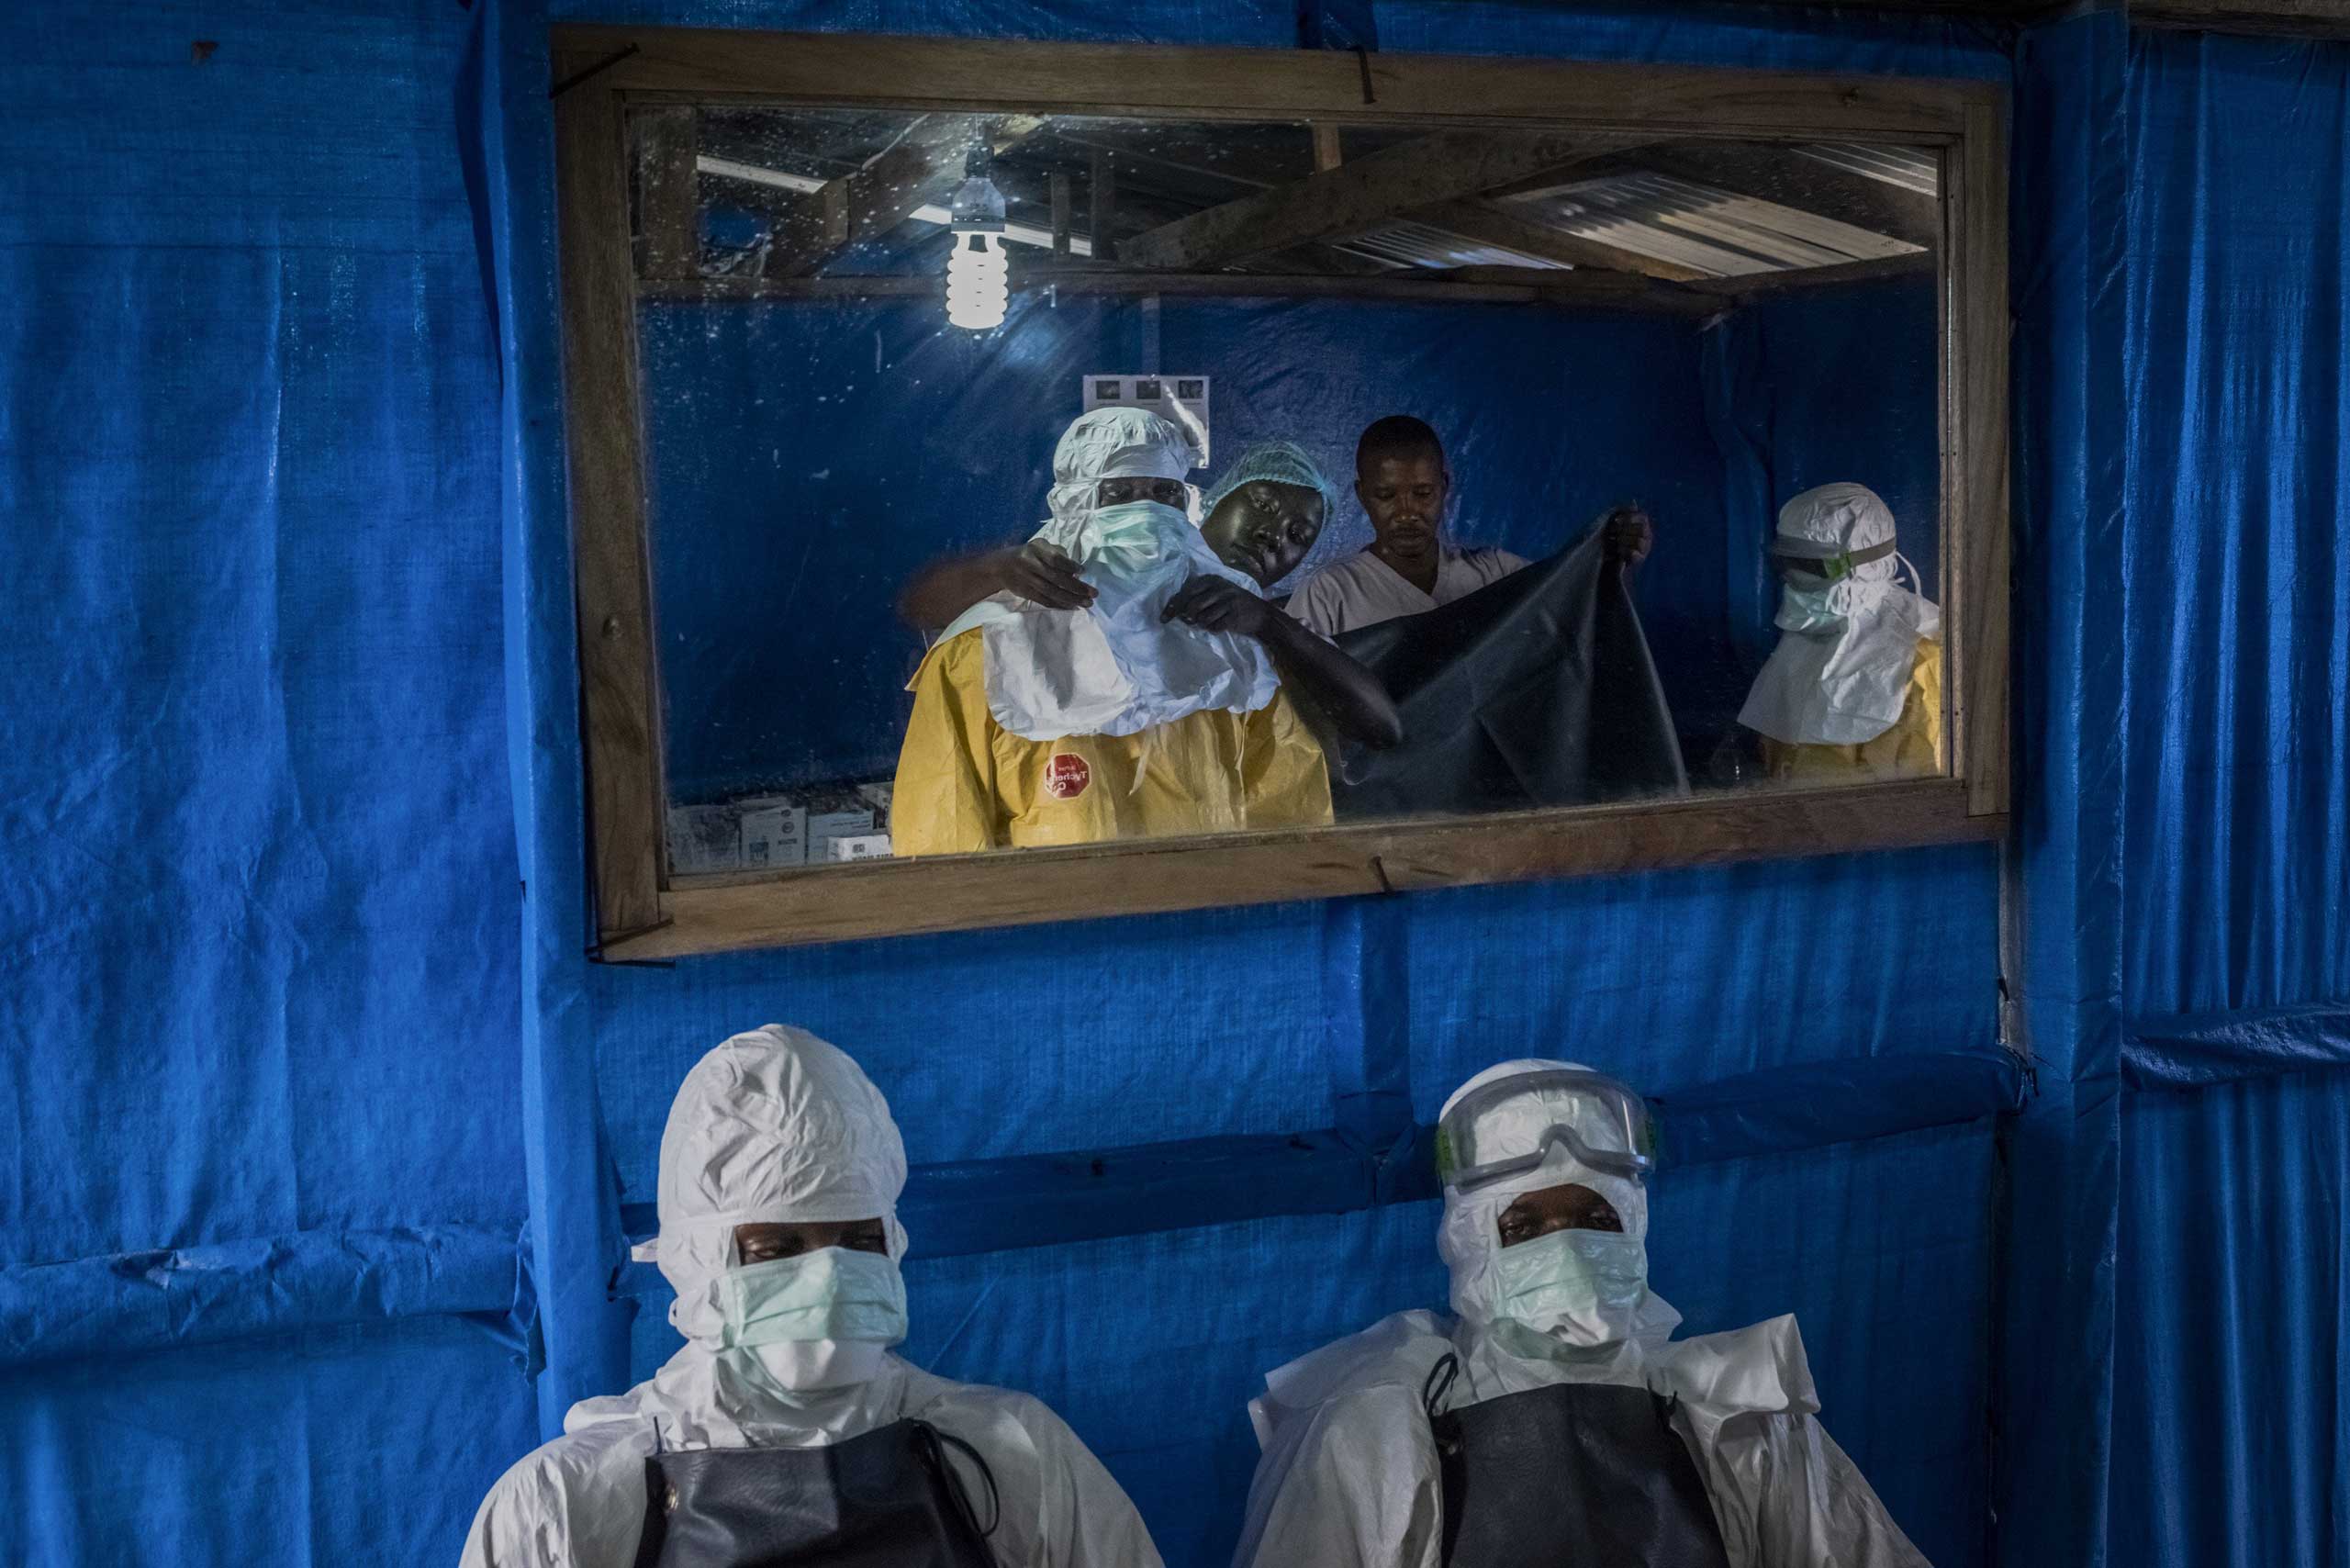 Health workers receive assistance with putting on their protective gear before entering the high-risk zone at the Bong County Ebola Treatment Unit.